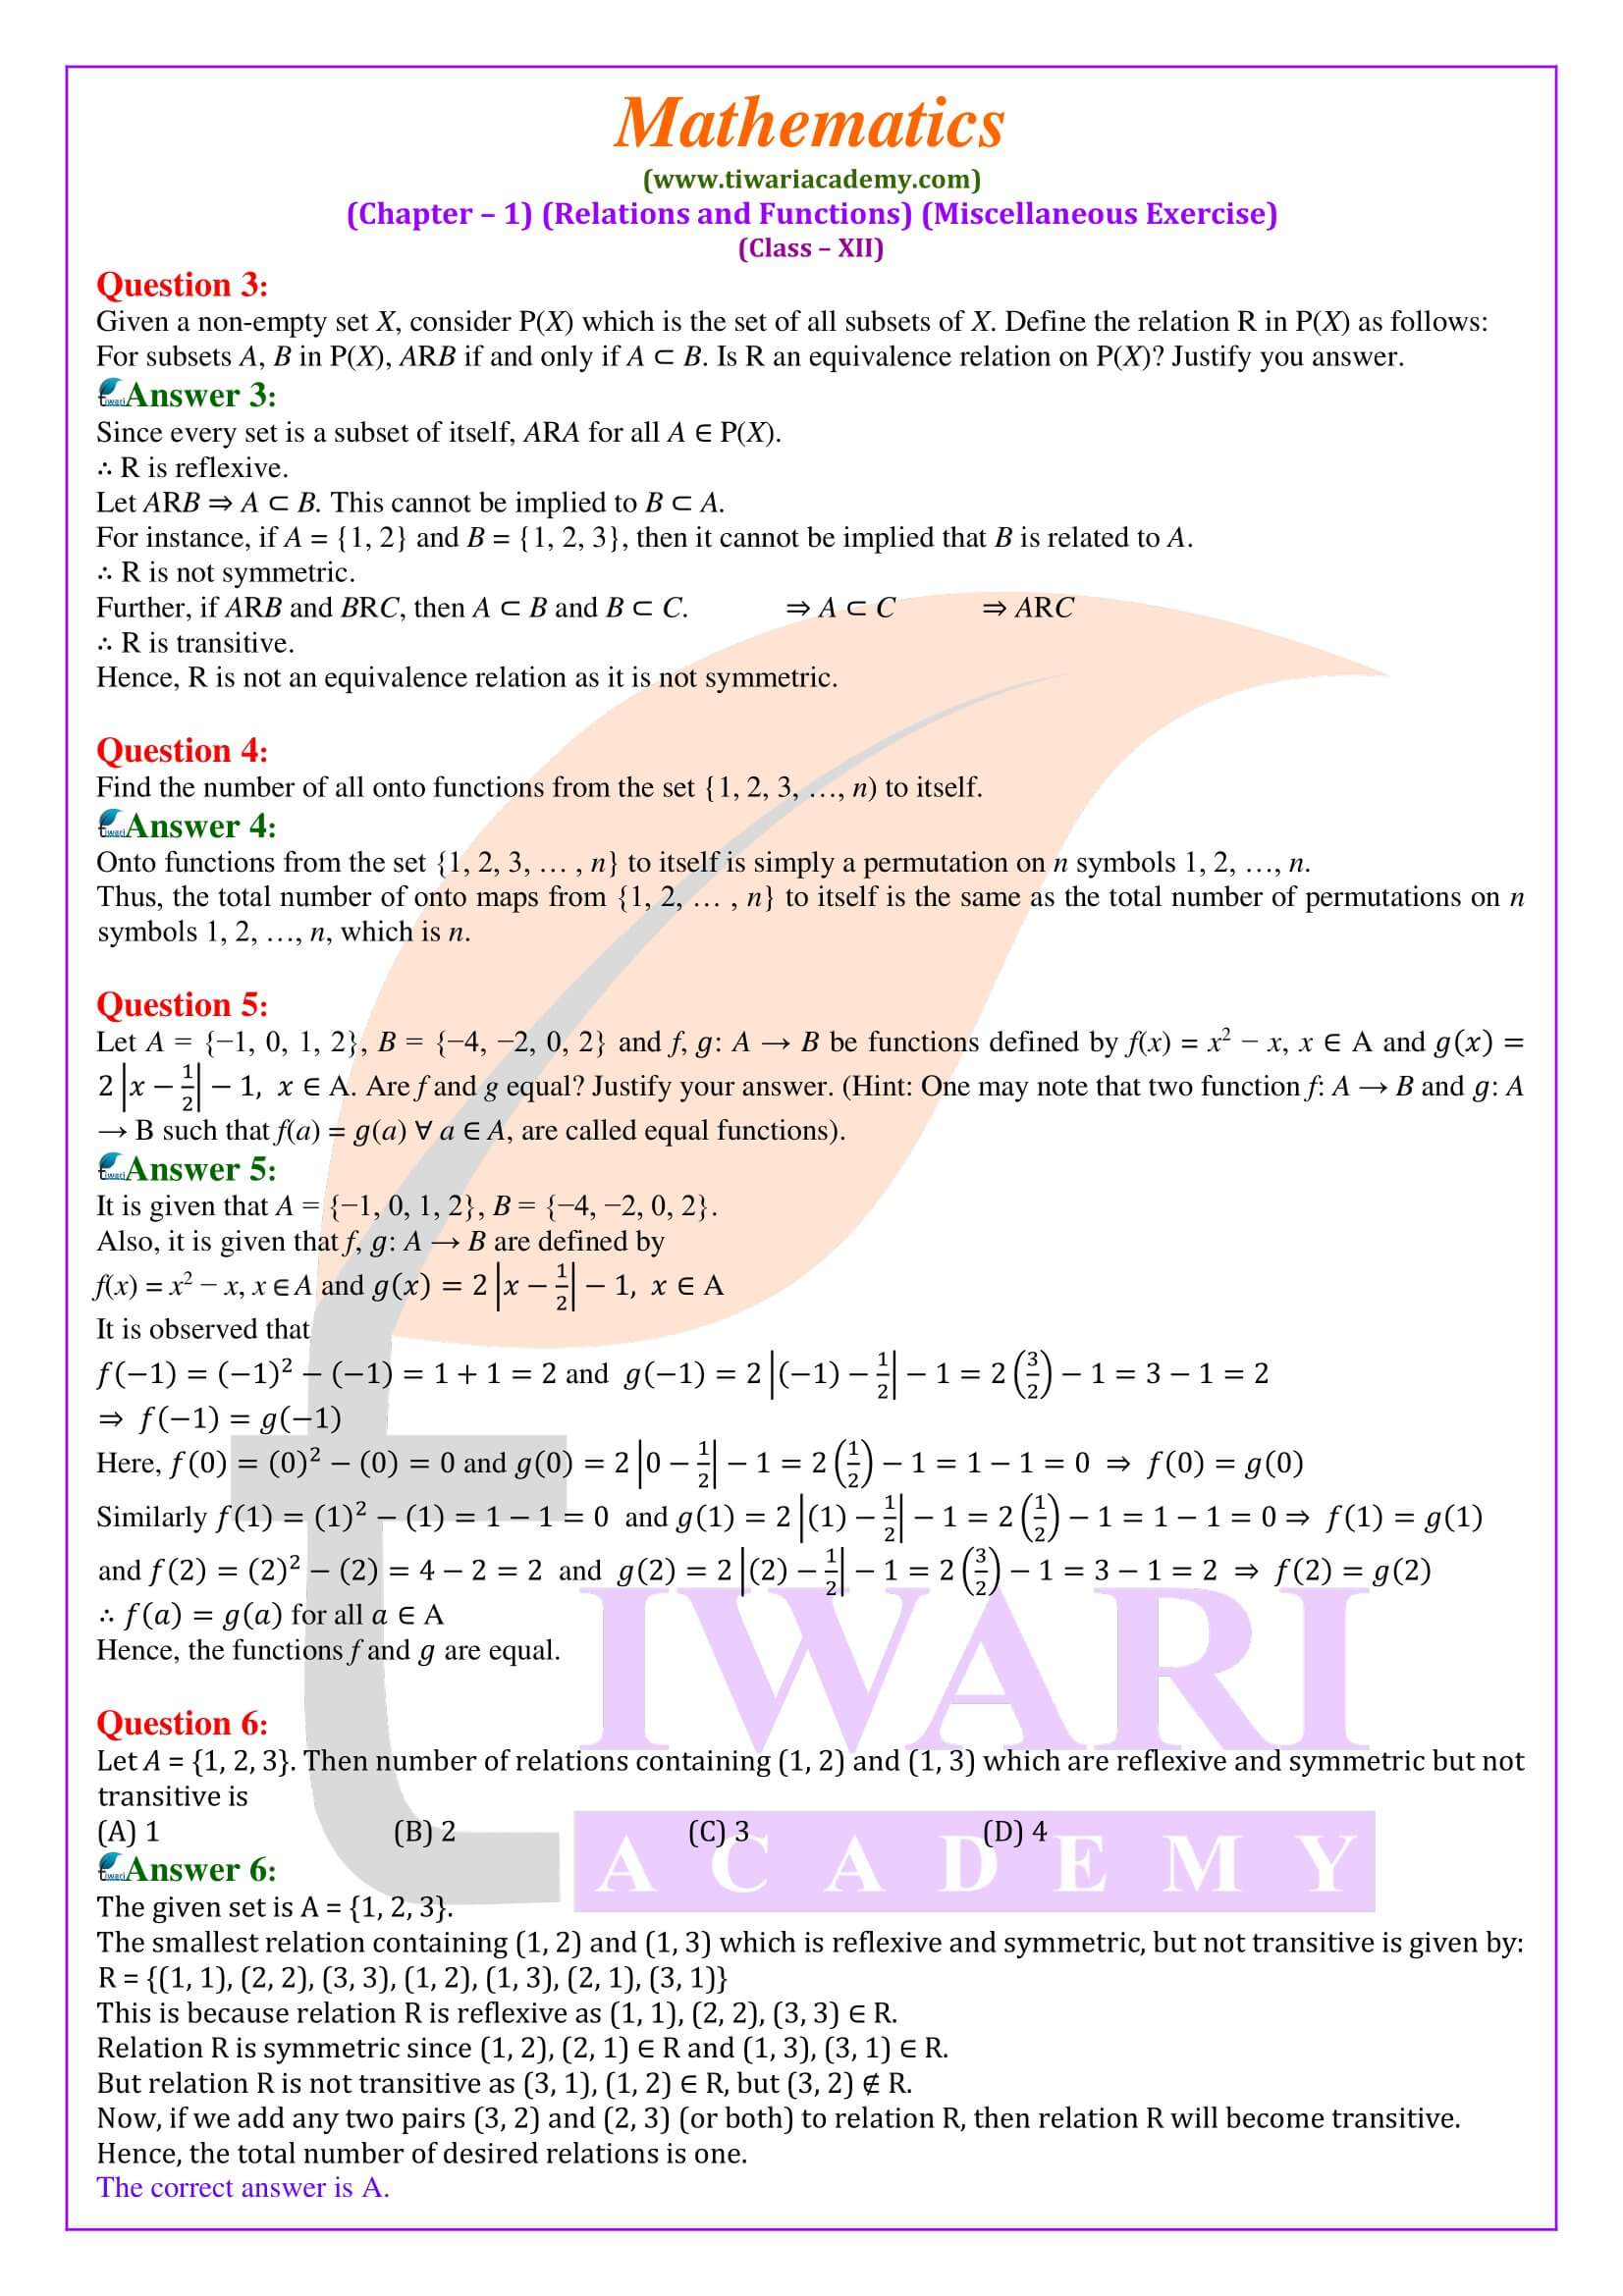 NCERT Solutions for Class 12 Maths Chapter 1 Miscellaneous Exercise